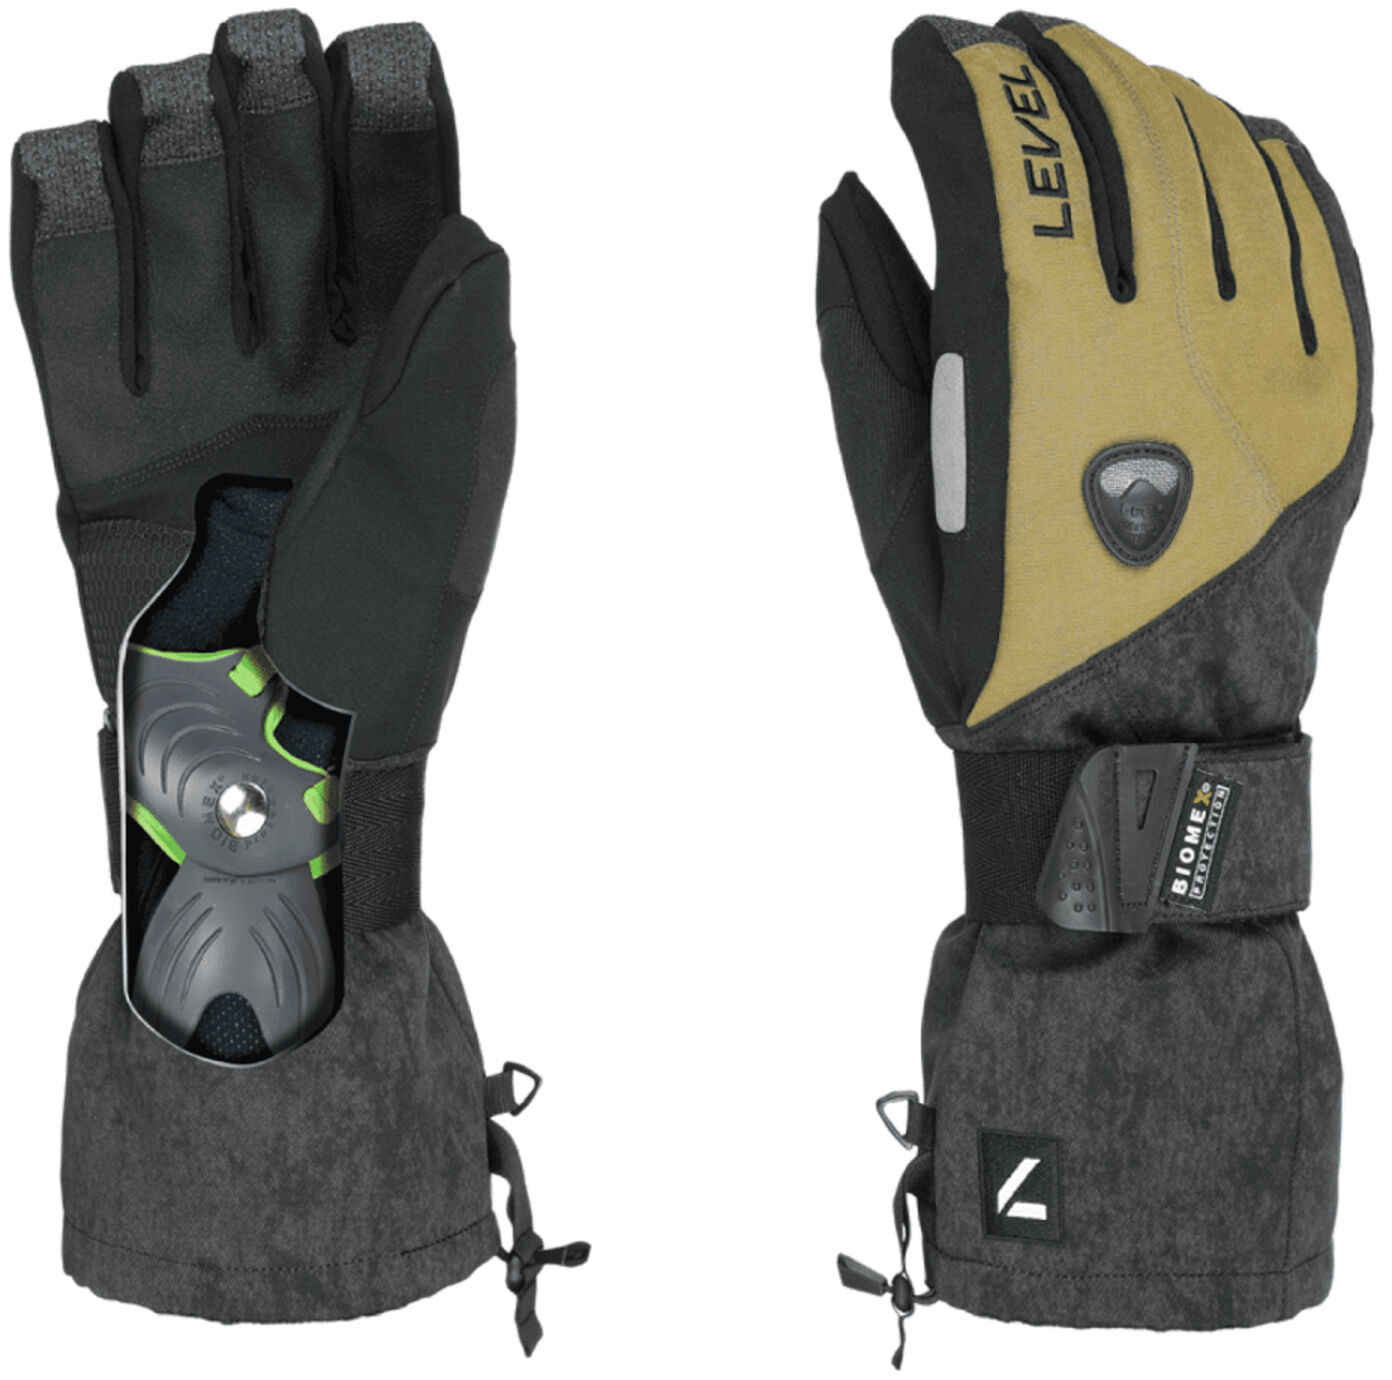 LEVEL FLY GLOVE OLIVE XL